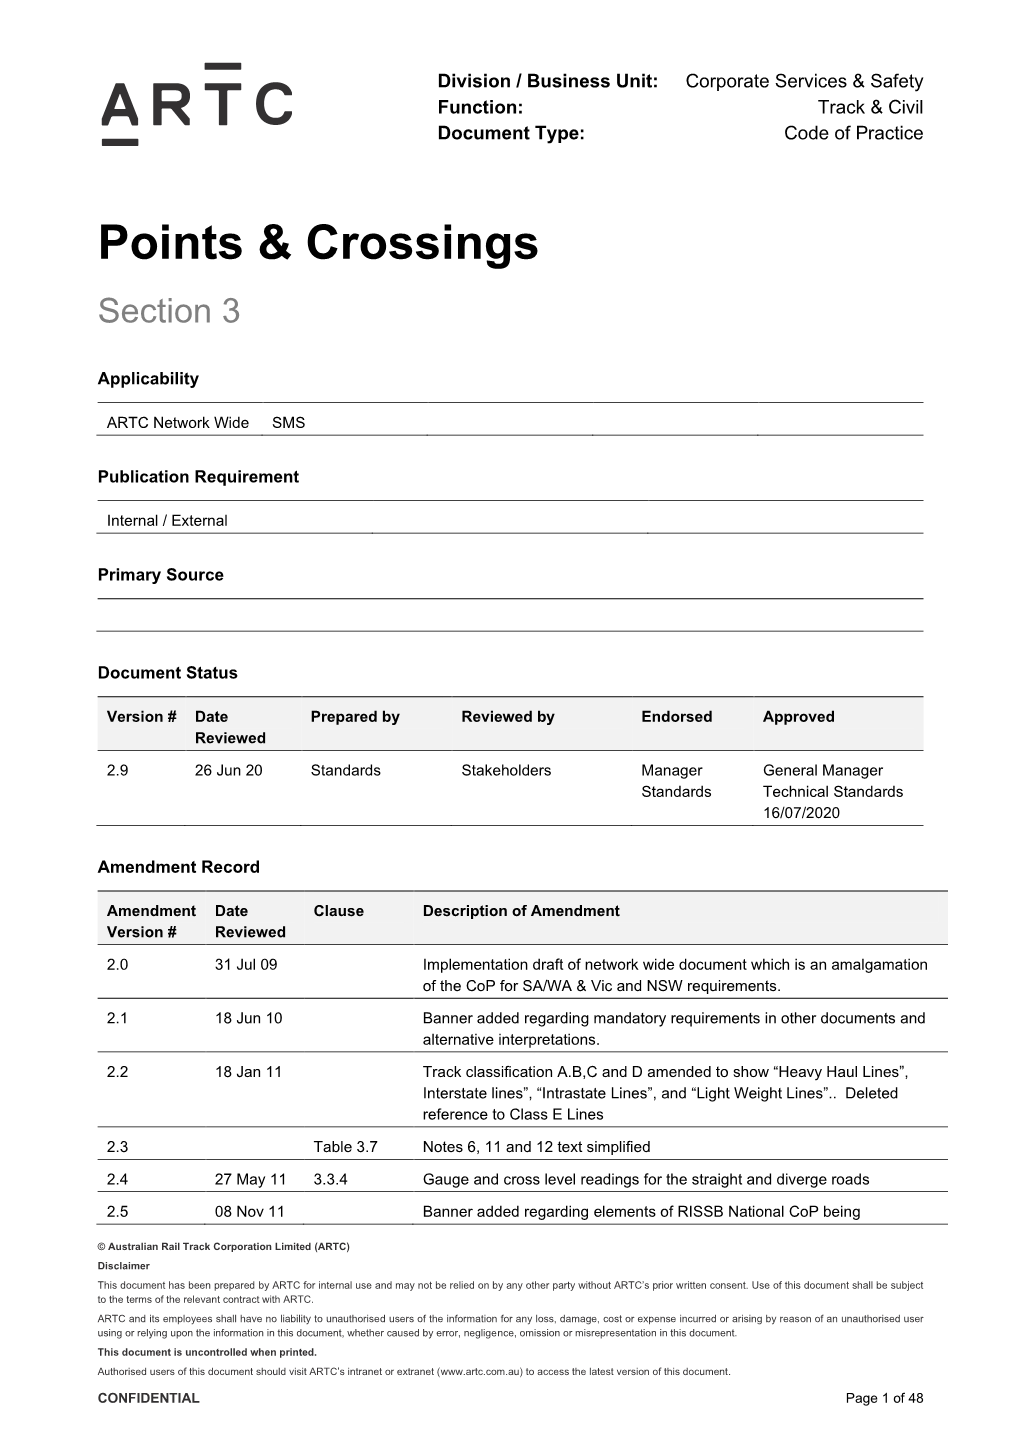 Points and Crossings